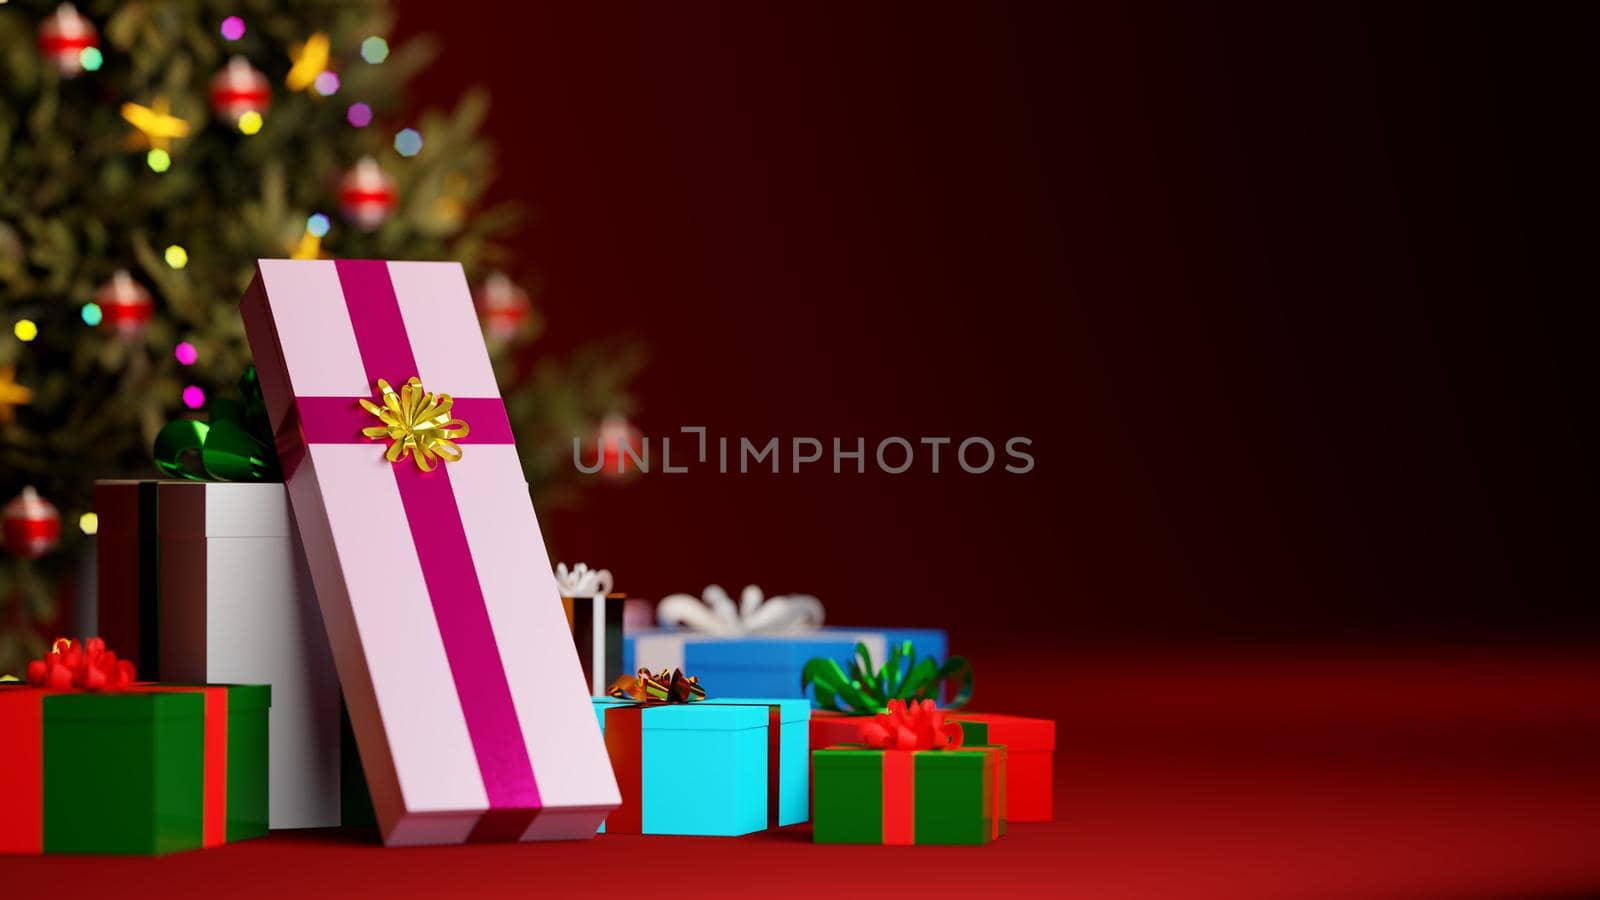 Christmas gifts concept backdrop. Gift boxes in front of a christmas tree on red background. Digital 3D render.